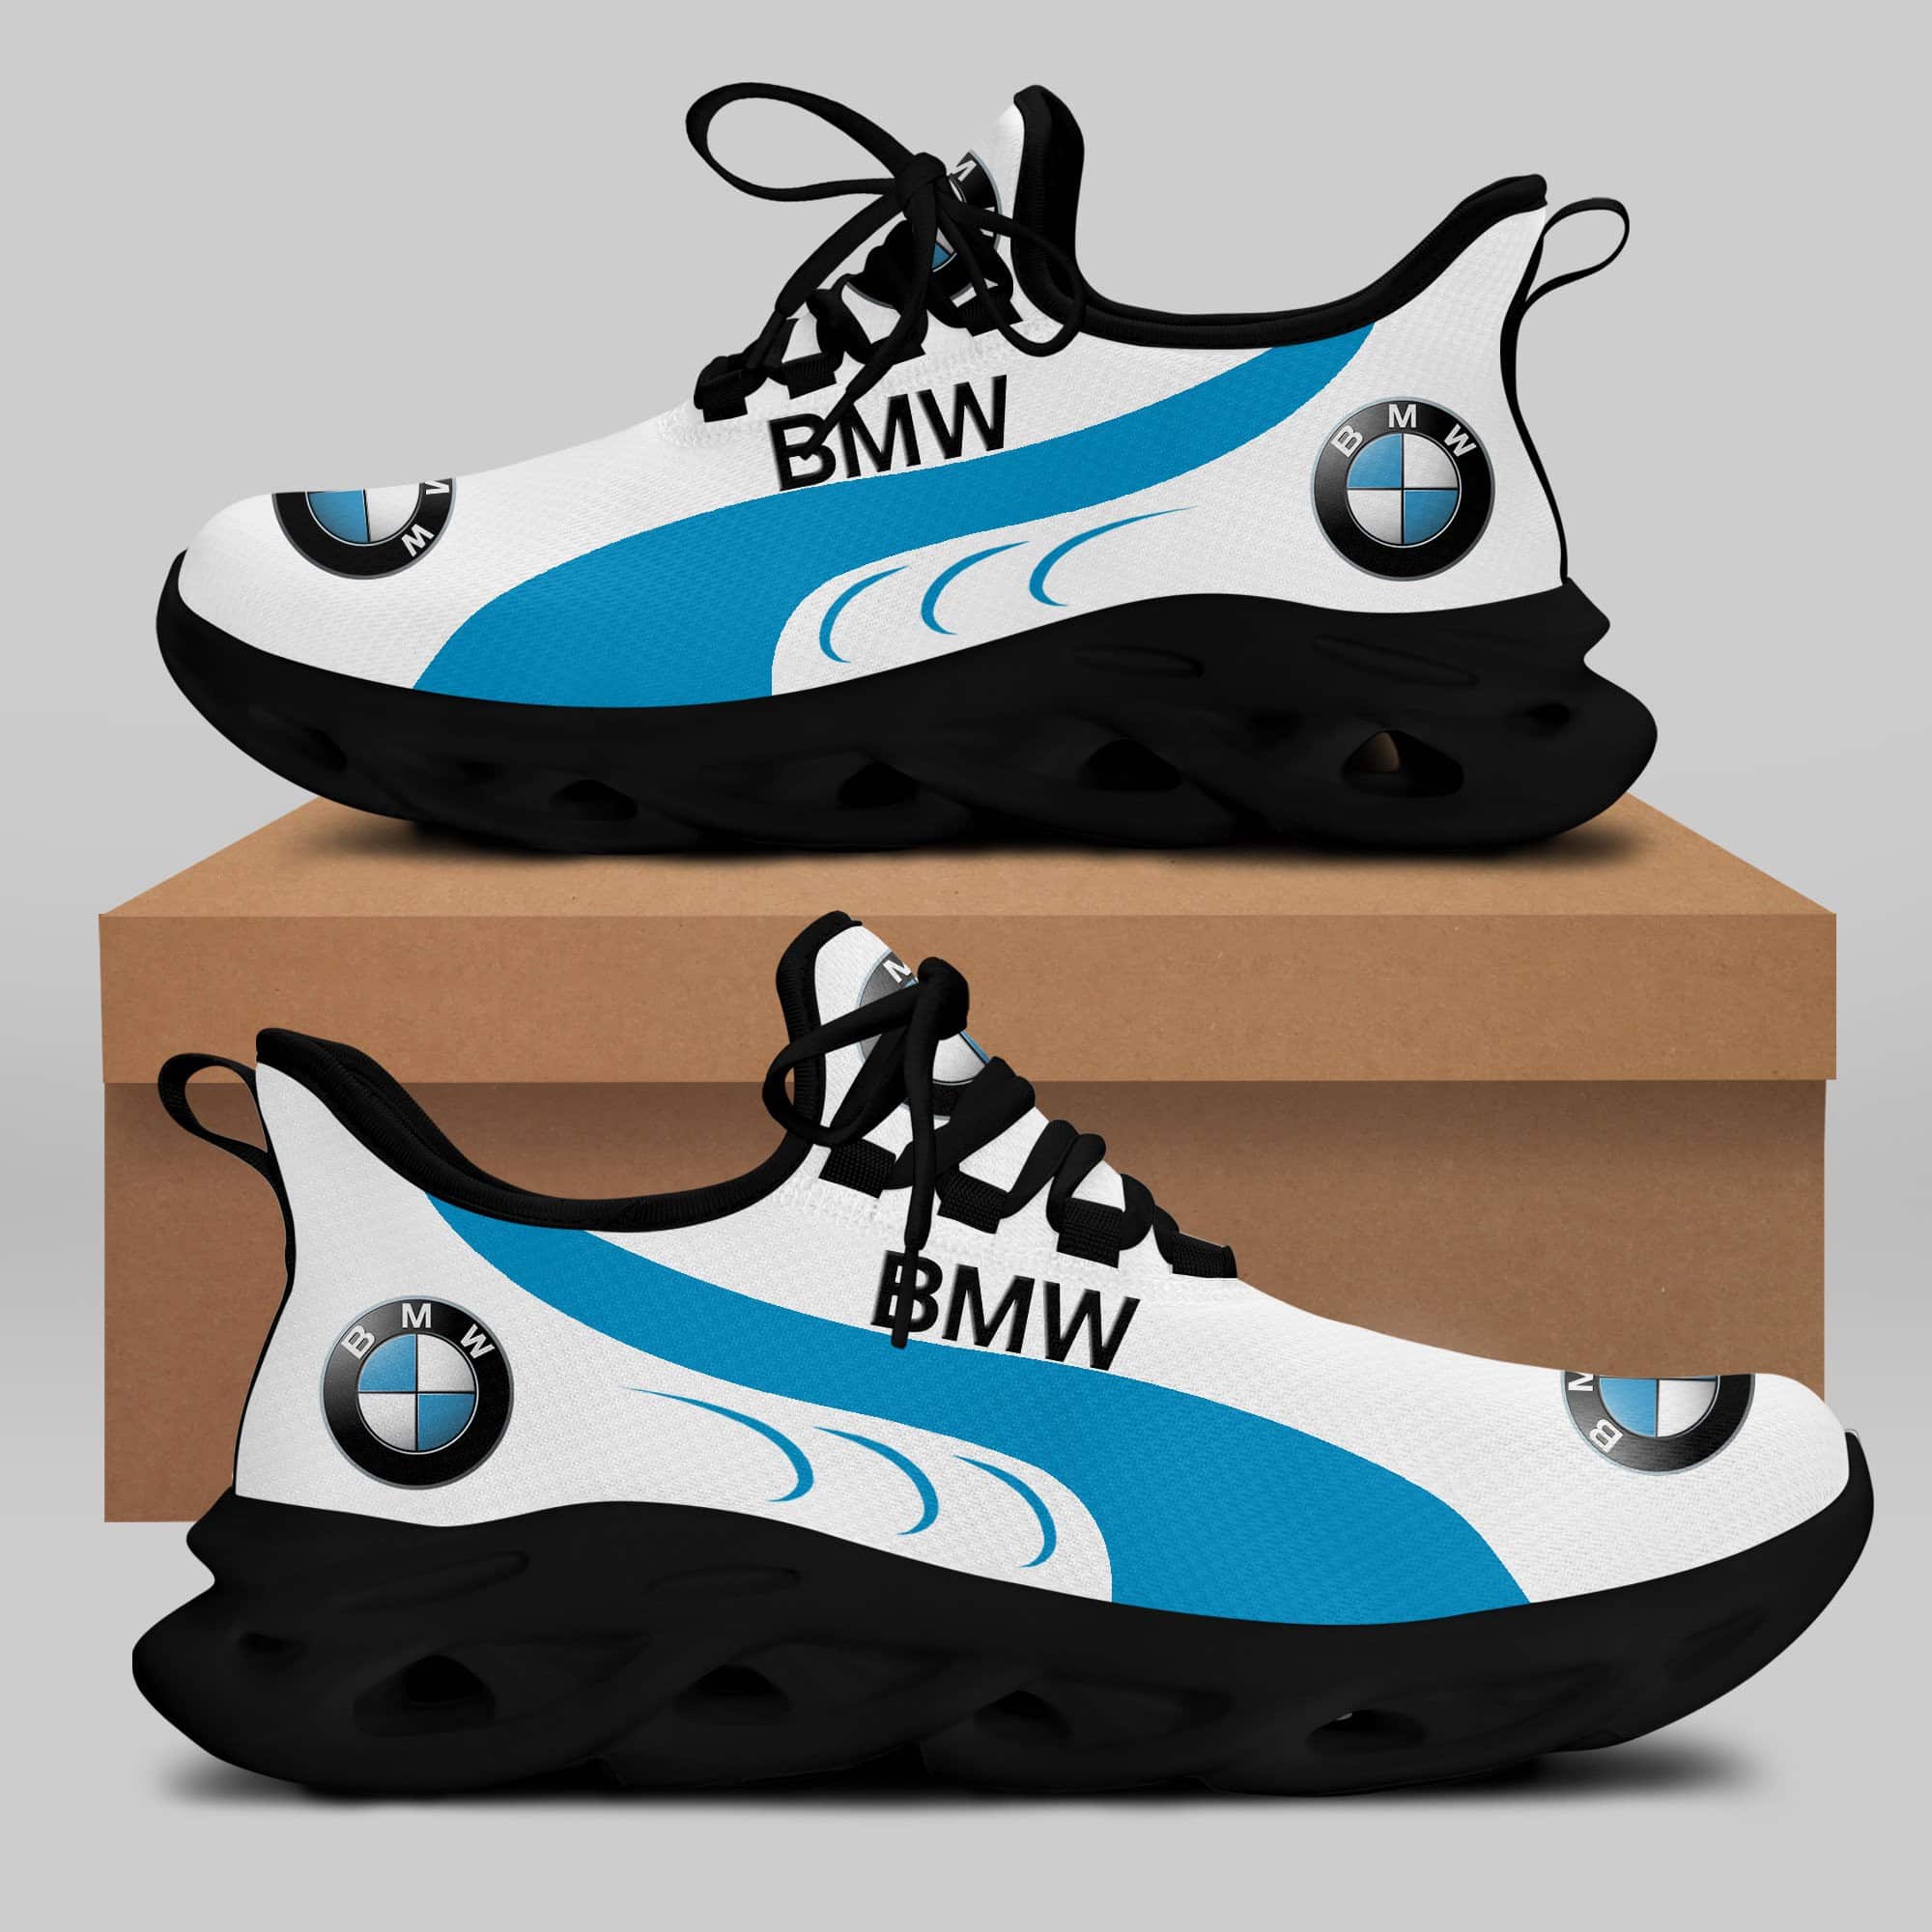 Bmw Running Shoes Max Soul Shoes Sneakers Ver 53 2